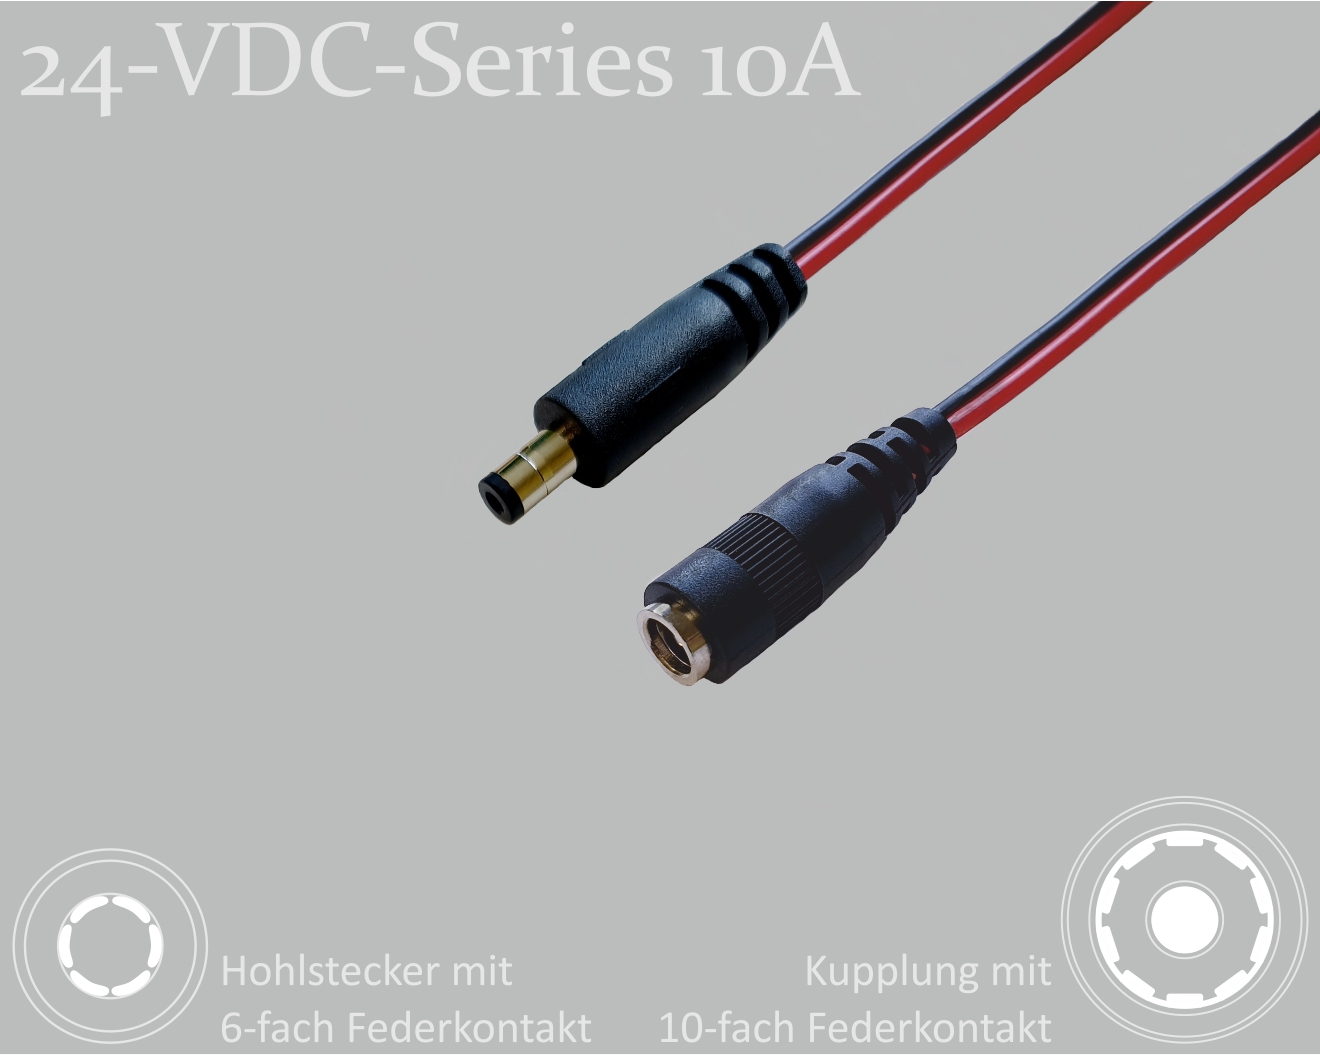 24-VDC-Series 10A, DC extension cable, DC male with 4-spring contact 2.5x5.5x9.5mm to DC female with 10-spring contact 2.5x5.5mm, flat cable 2x0.75mm², red/black, 4 m